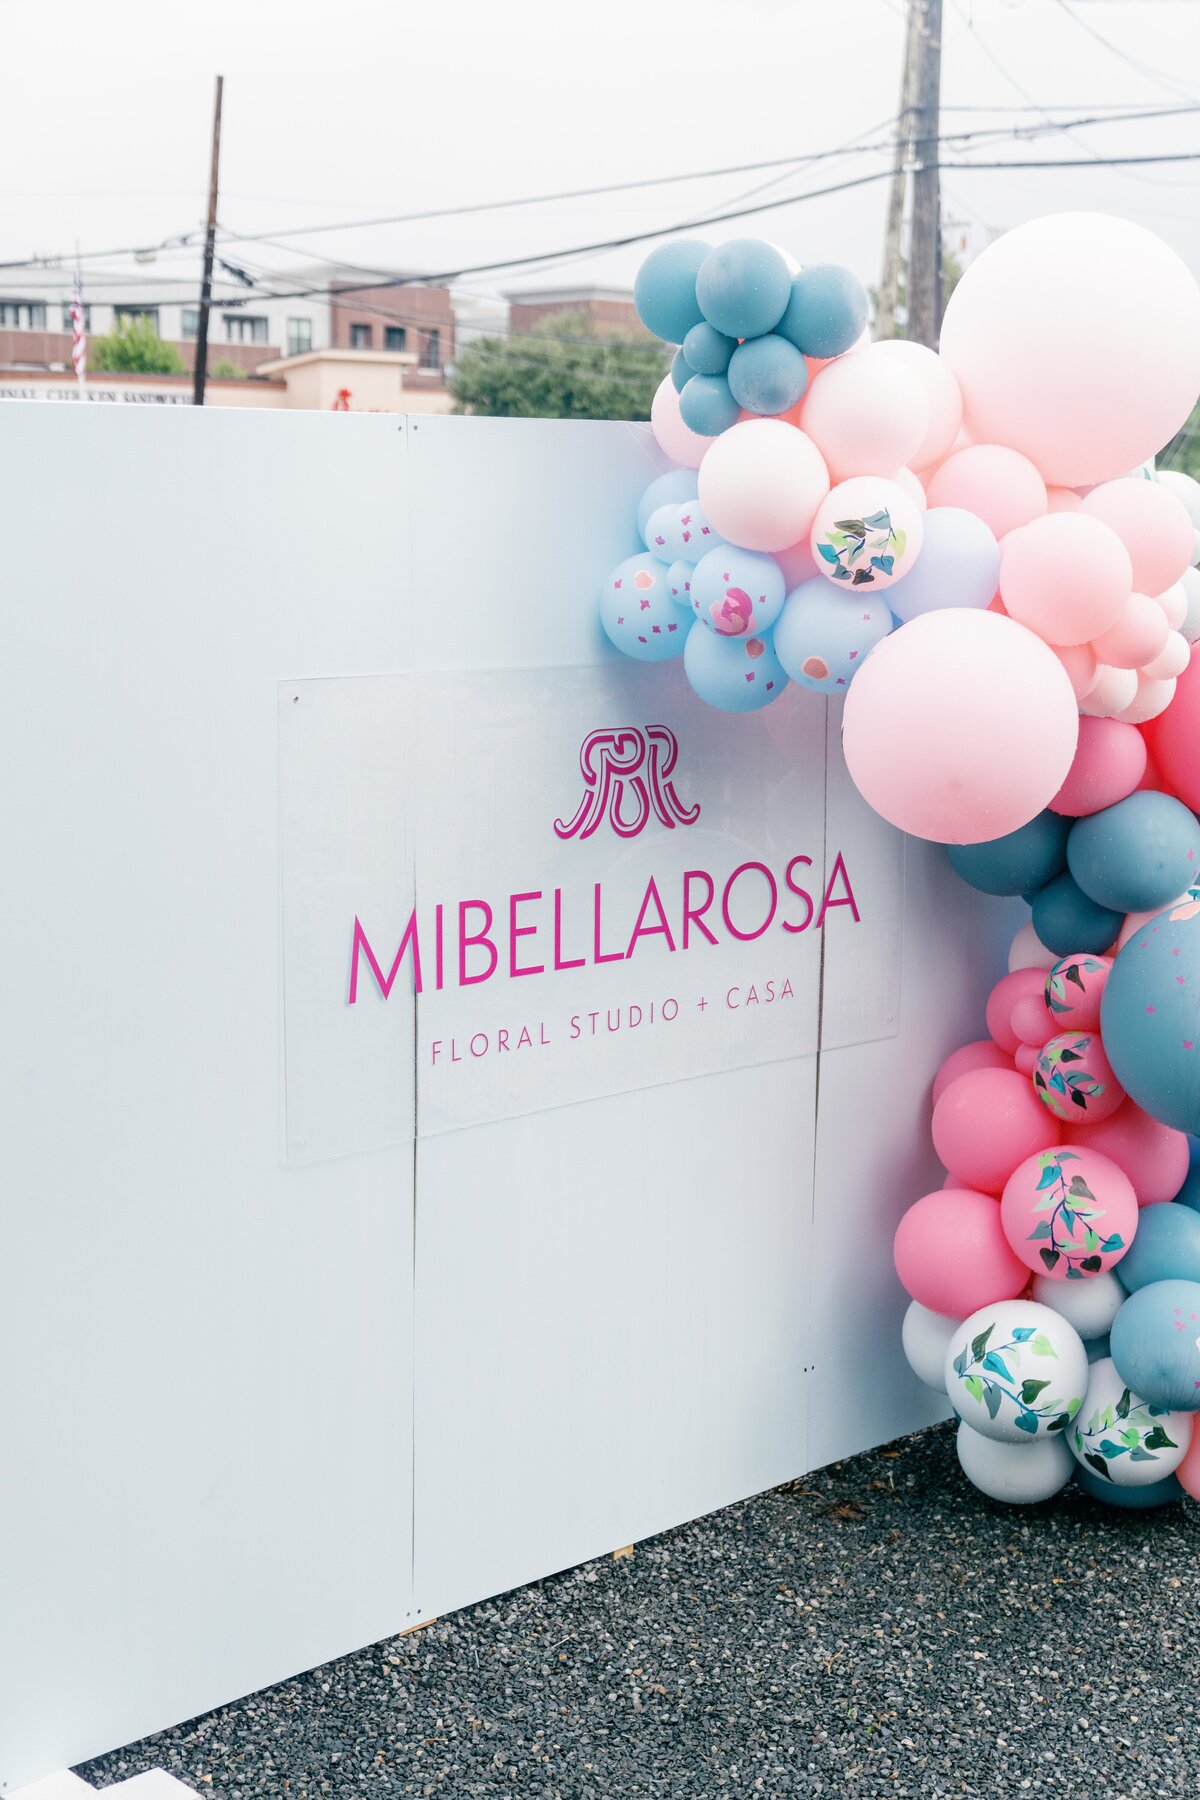 Mibellarosa floral studio and casa white event backdrop with pink and blue balloon arch